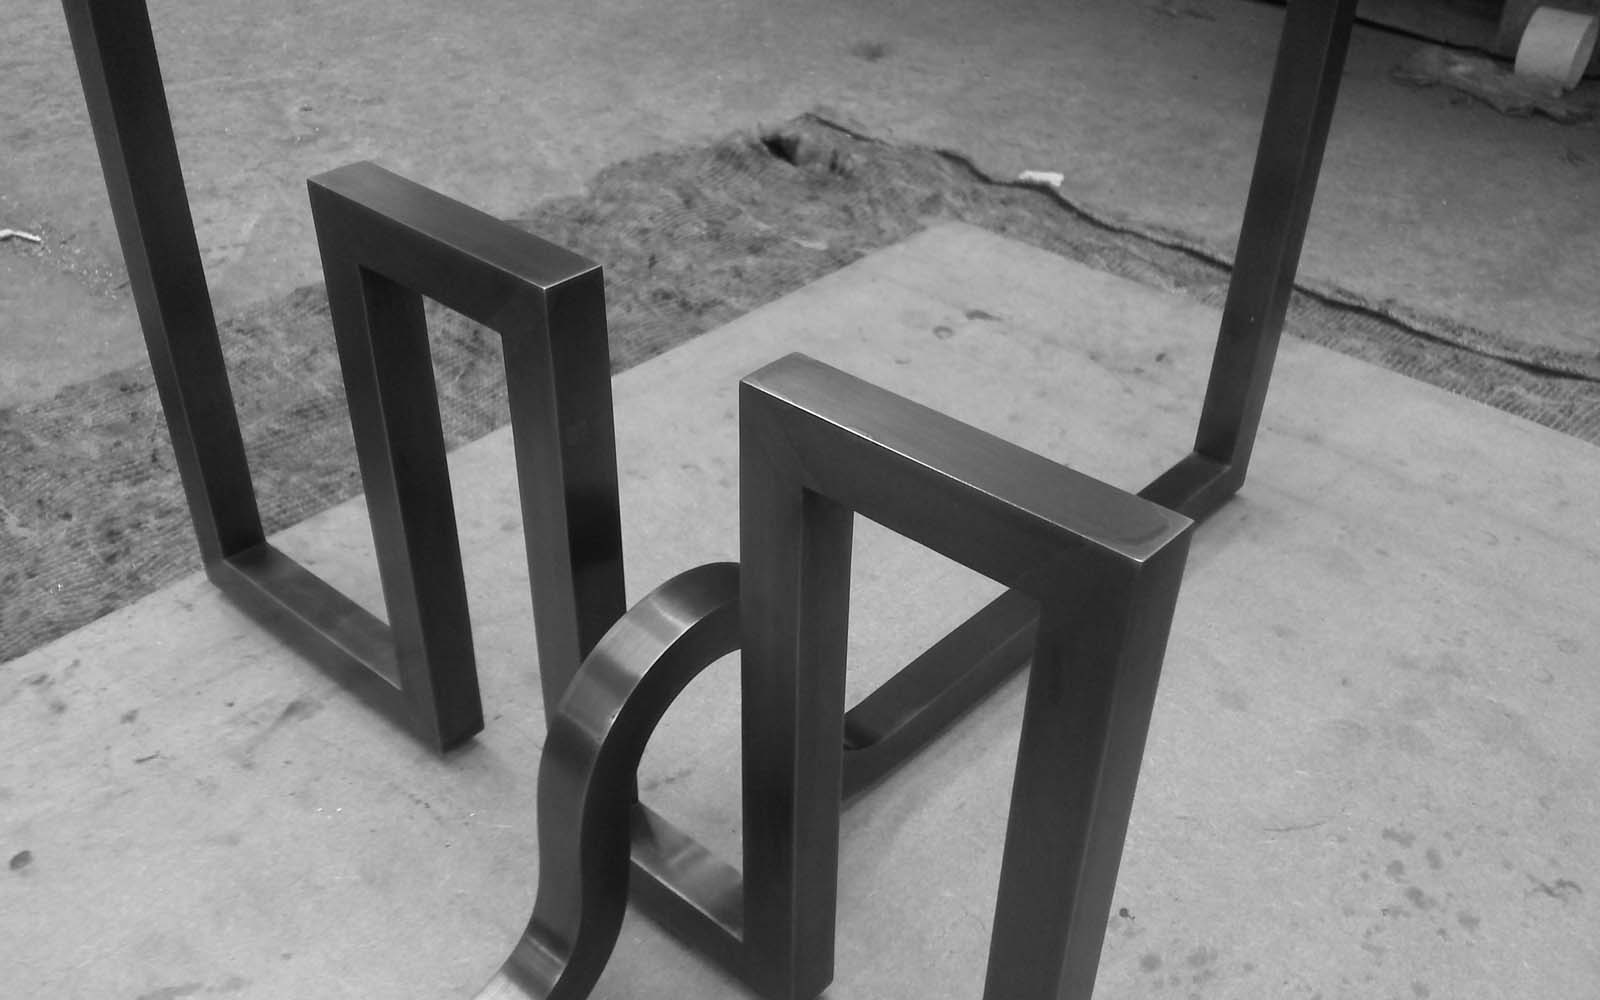 Escher-style metalwork forming table support